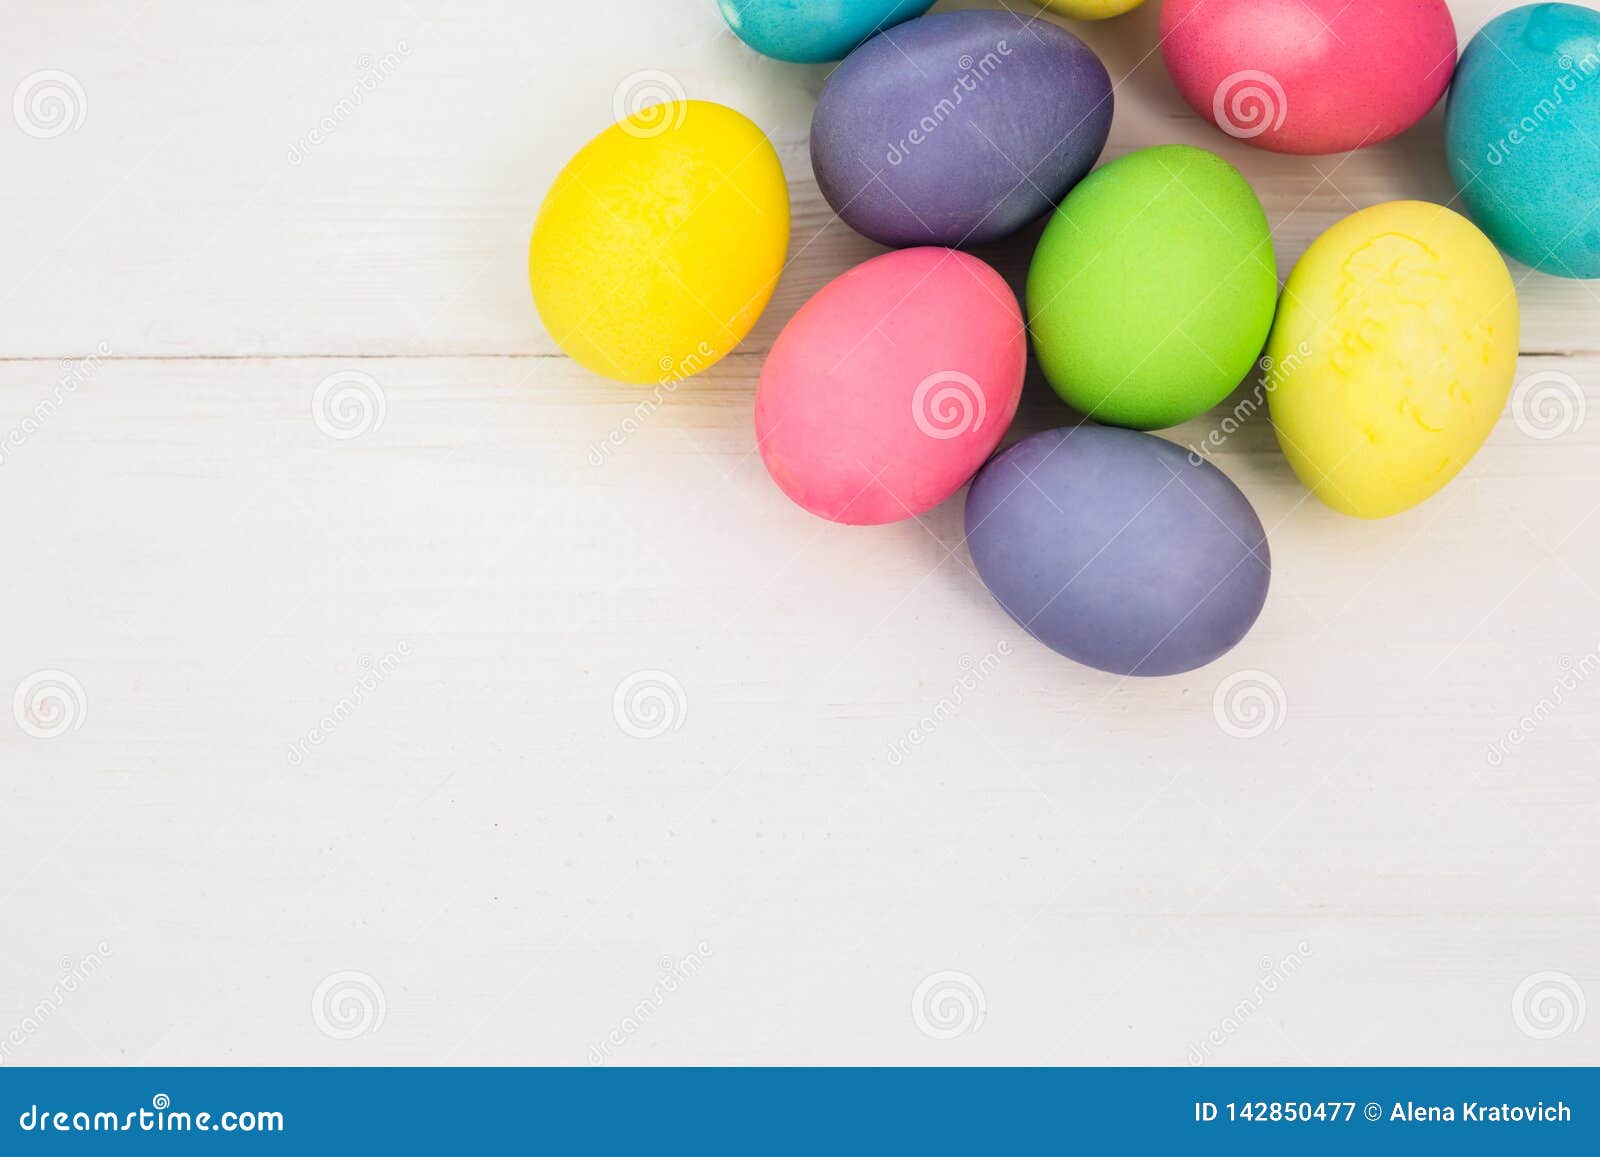 Pastel Easter Eggs on Rustic Whote Wooden Table Stock Image - Image of ...